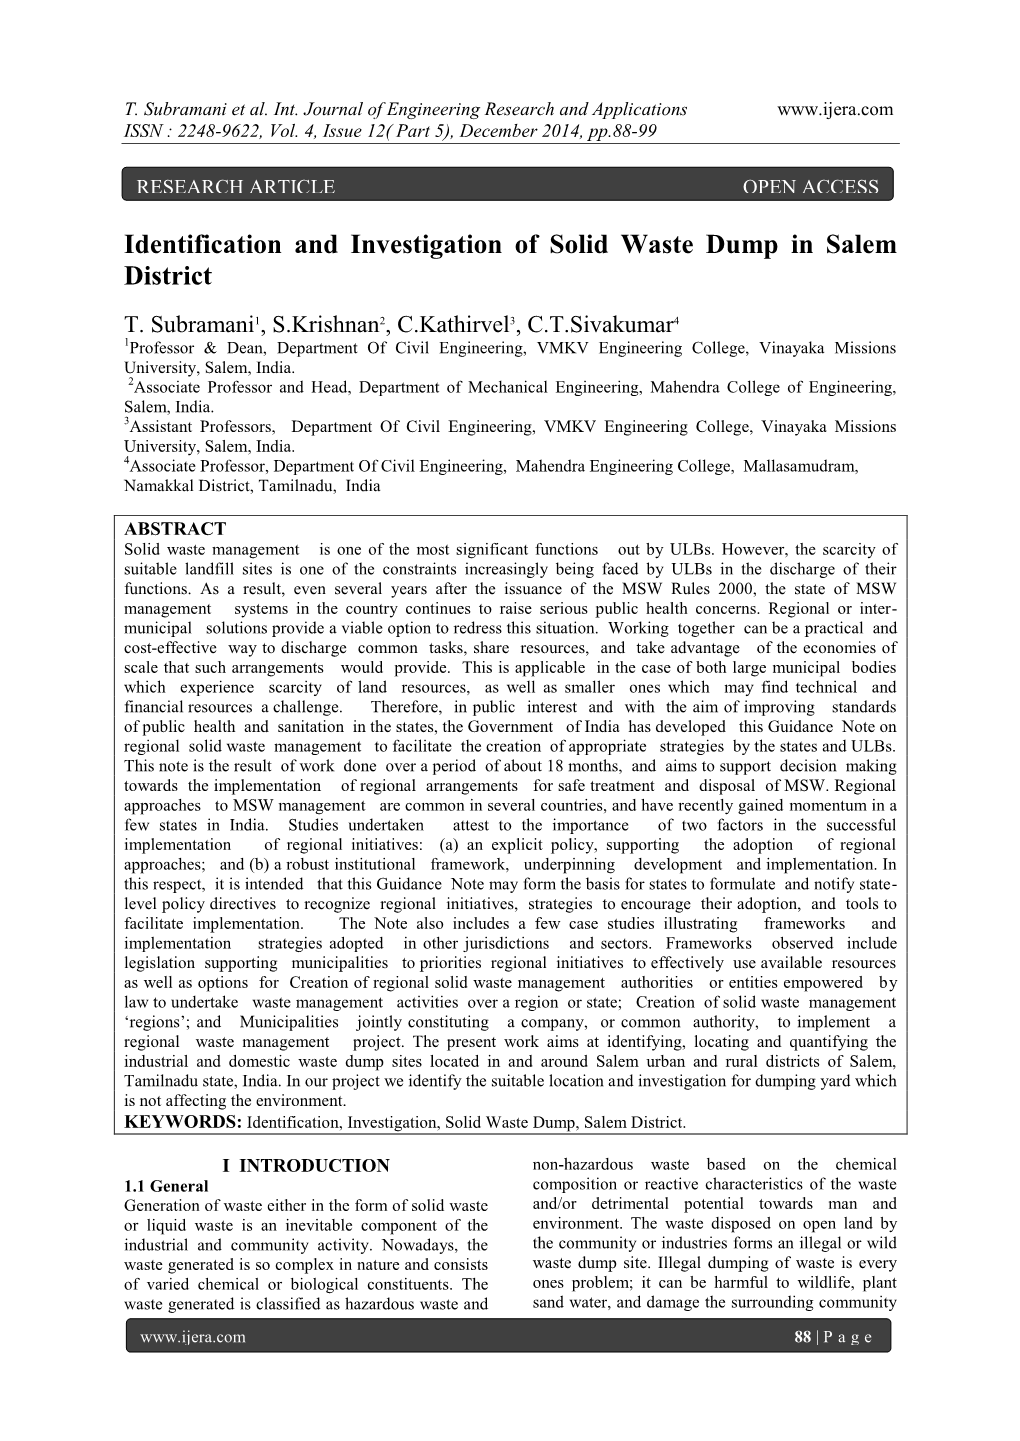 Identification and Investigation of Solid Waste Dump in Salem District